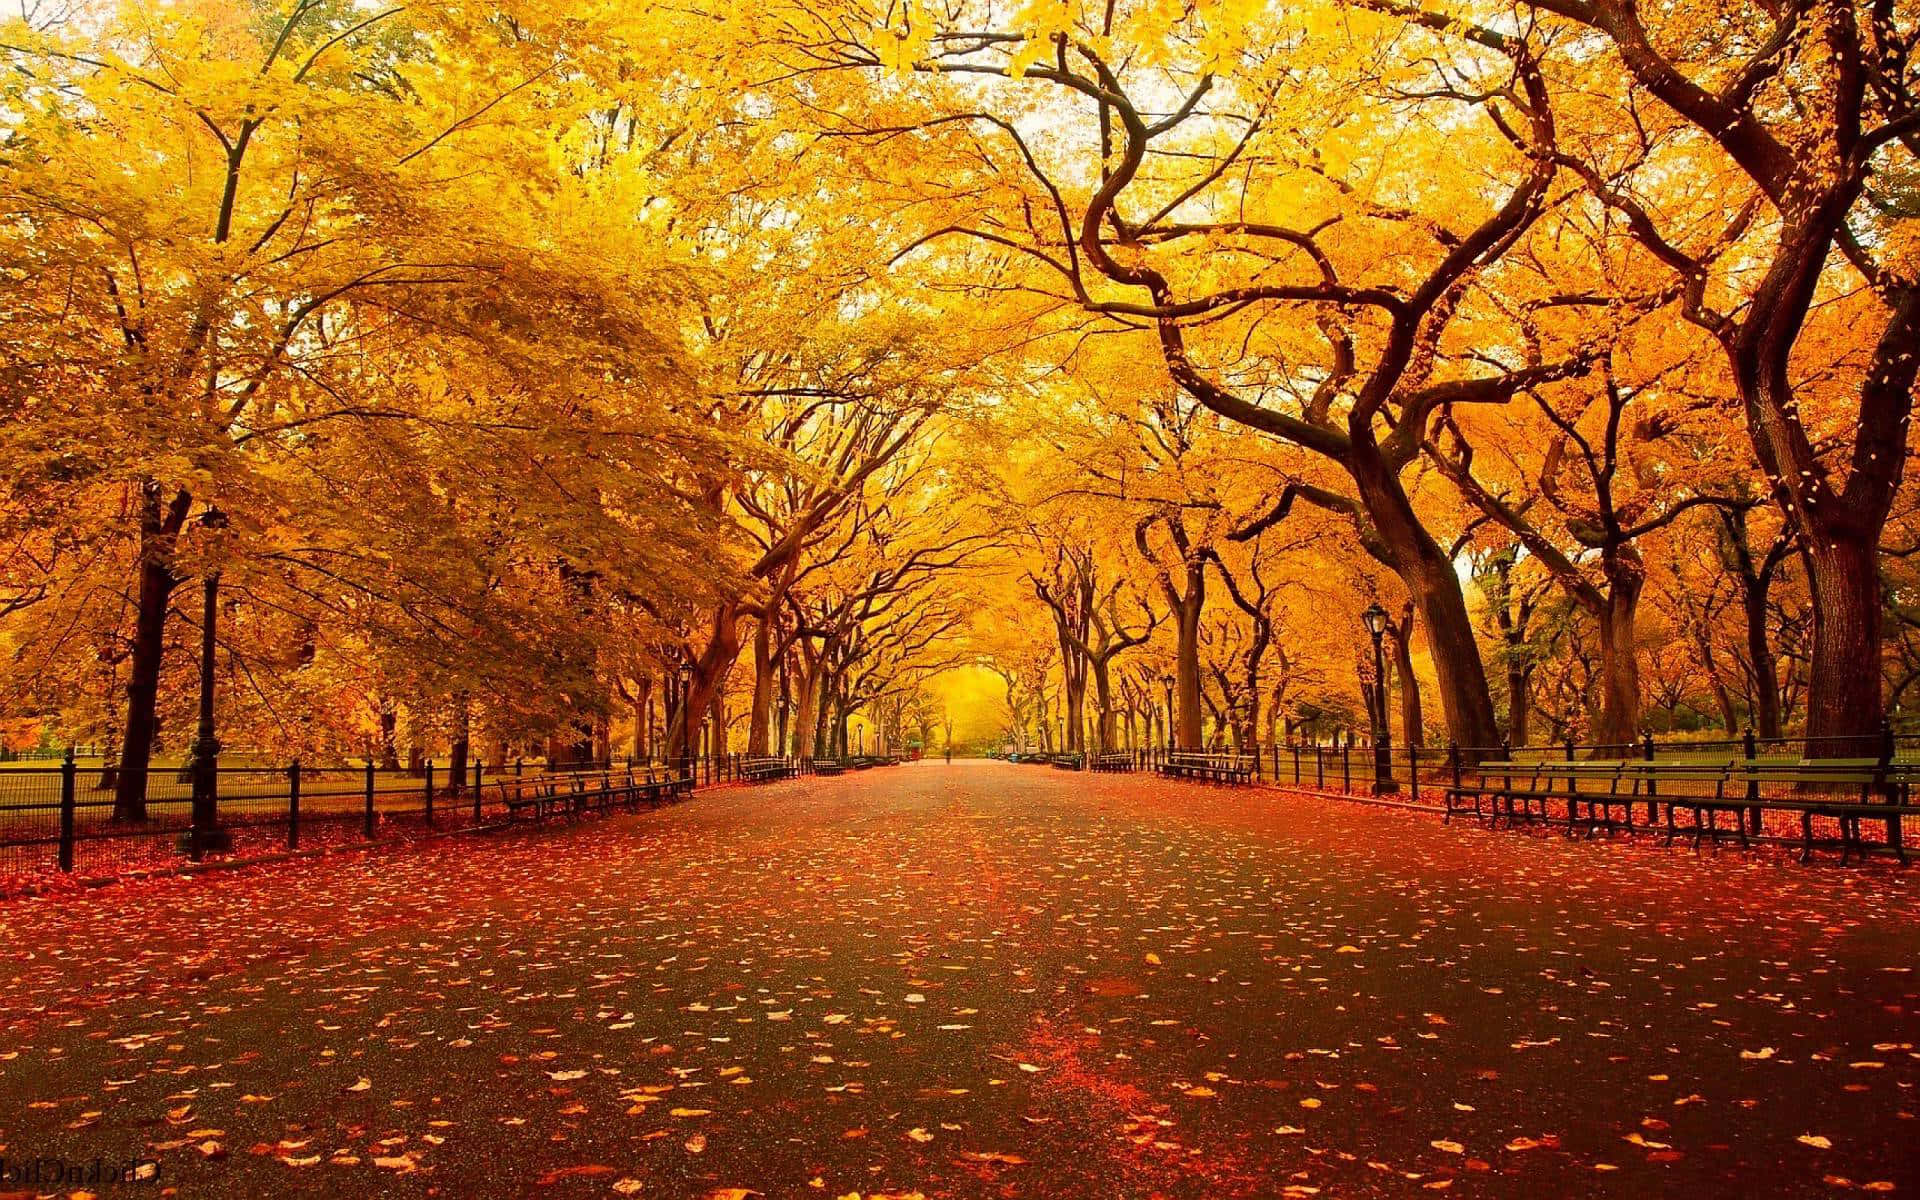 Enjoy The Beauty Of The Season With A Cool Fall Walk. Background